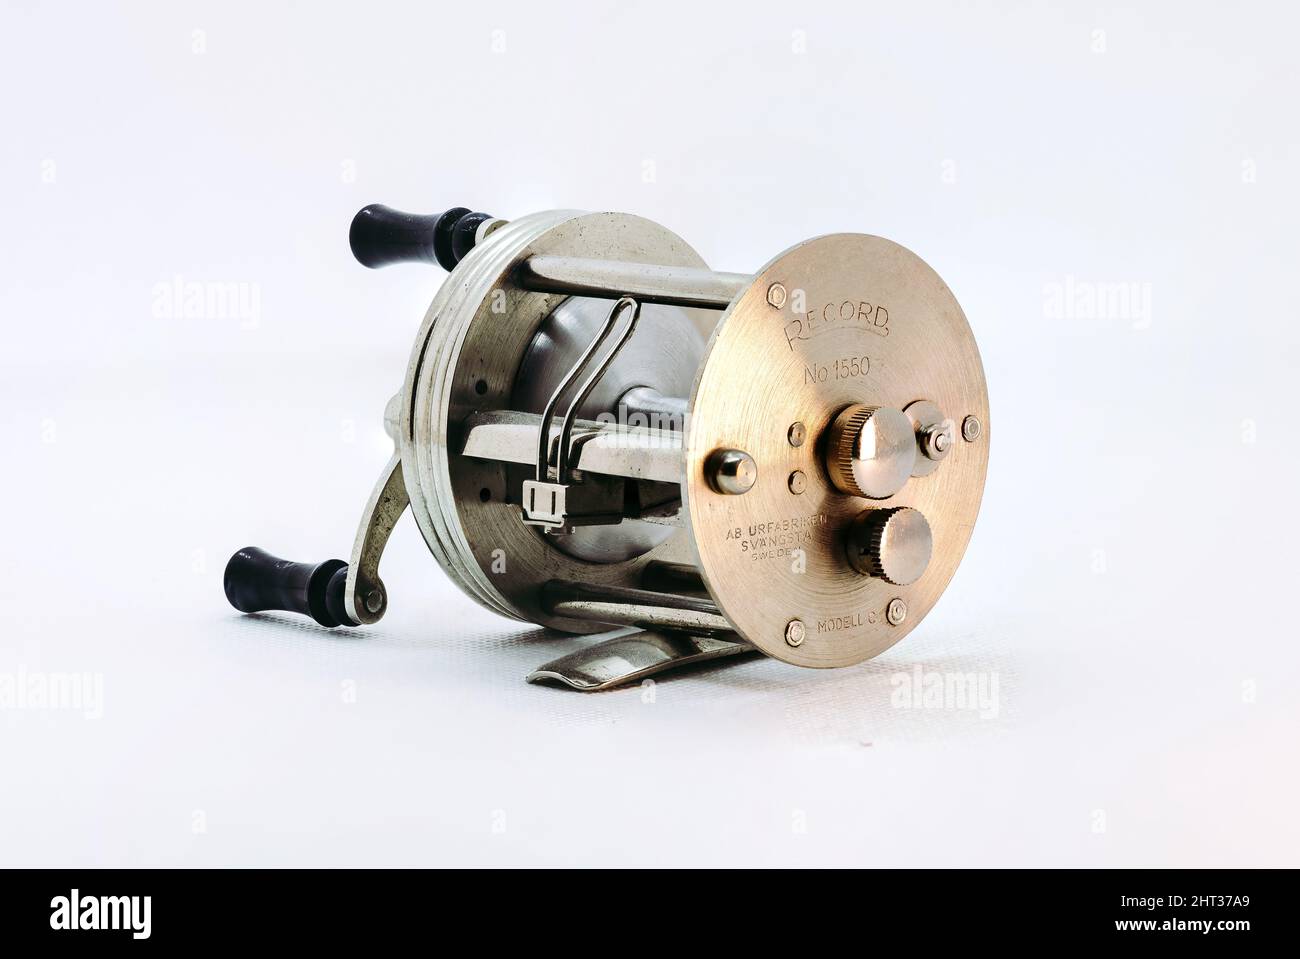 https://c8.alamy.com/comp/2HT37A9/closeup-of-a-vintage-fishing-reel-on-white-background-2HT37A9.jpg